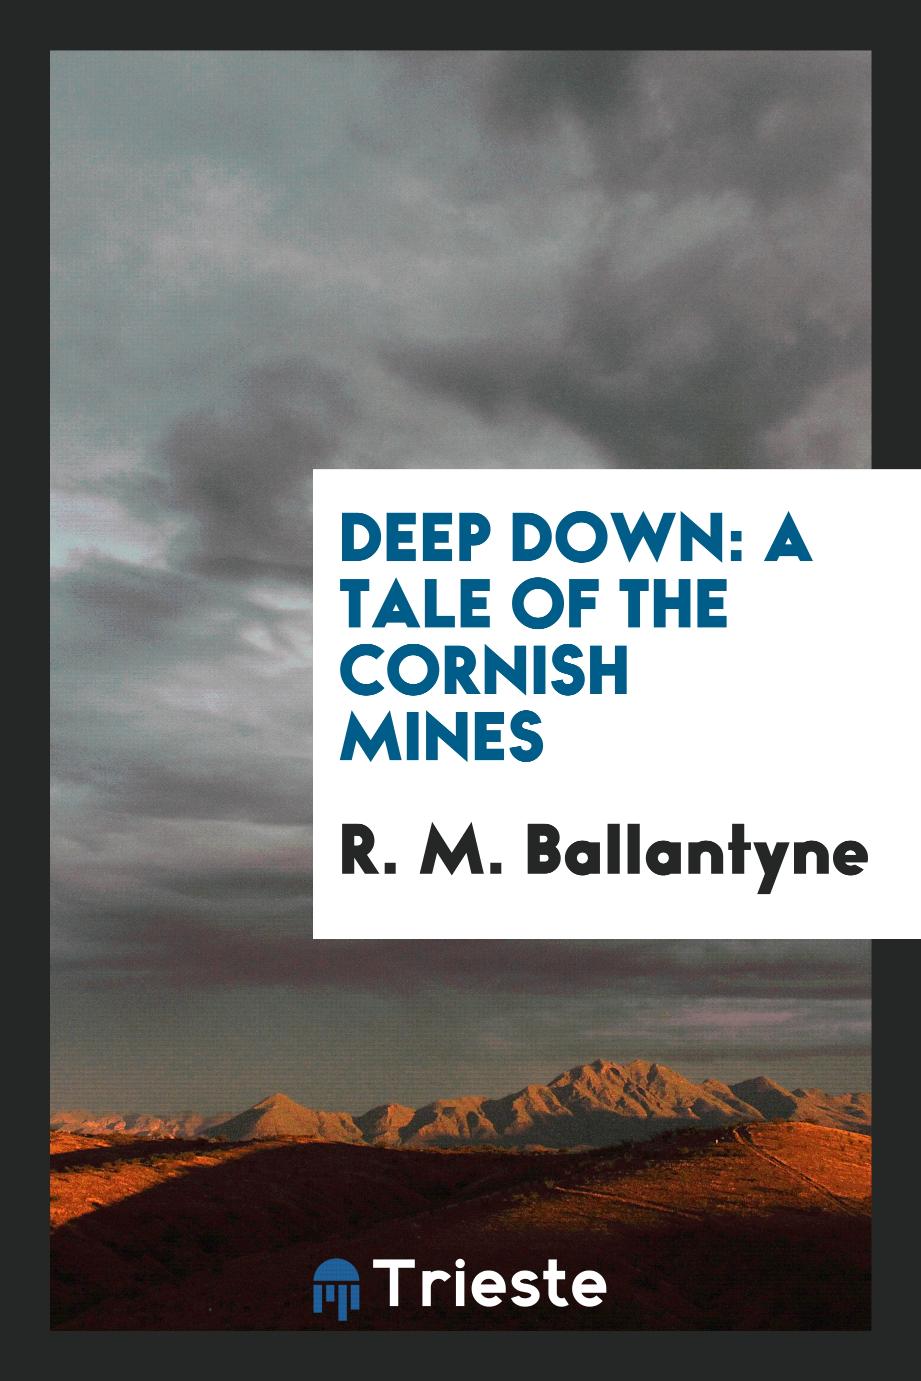 Deep down: a tale of the Cornish mines